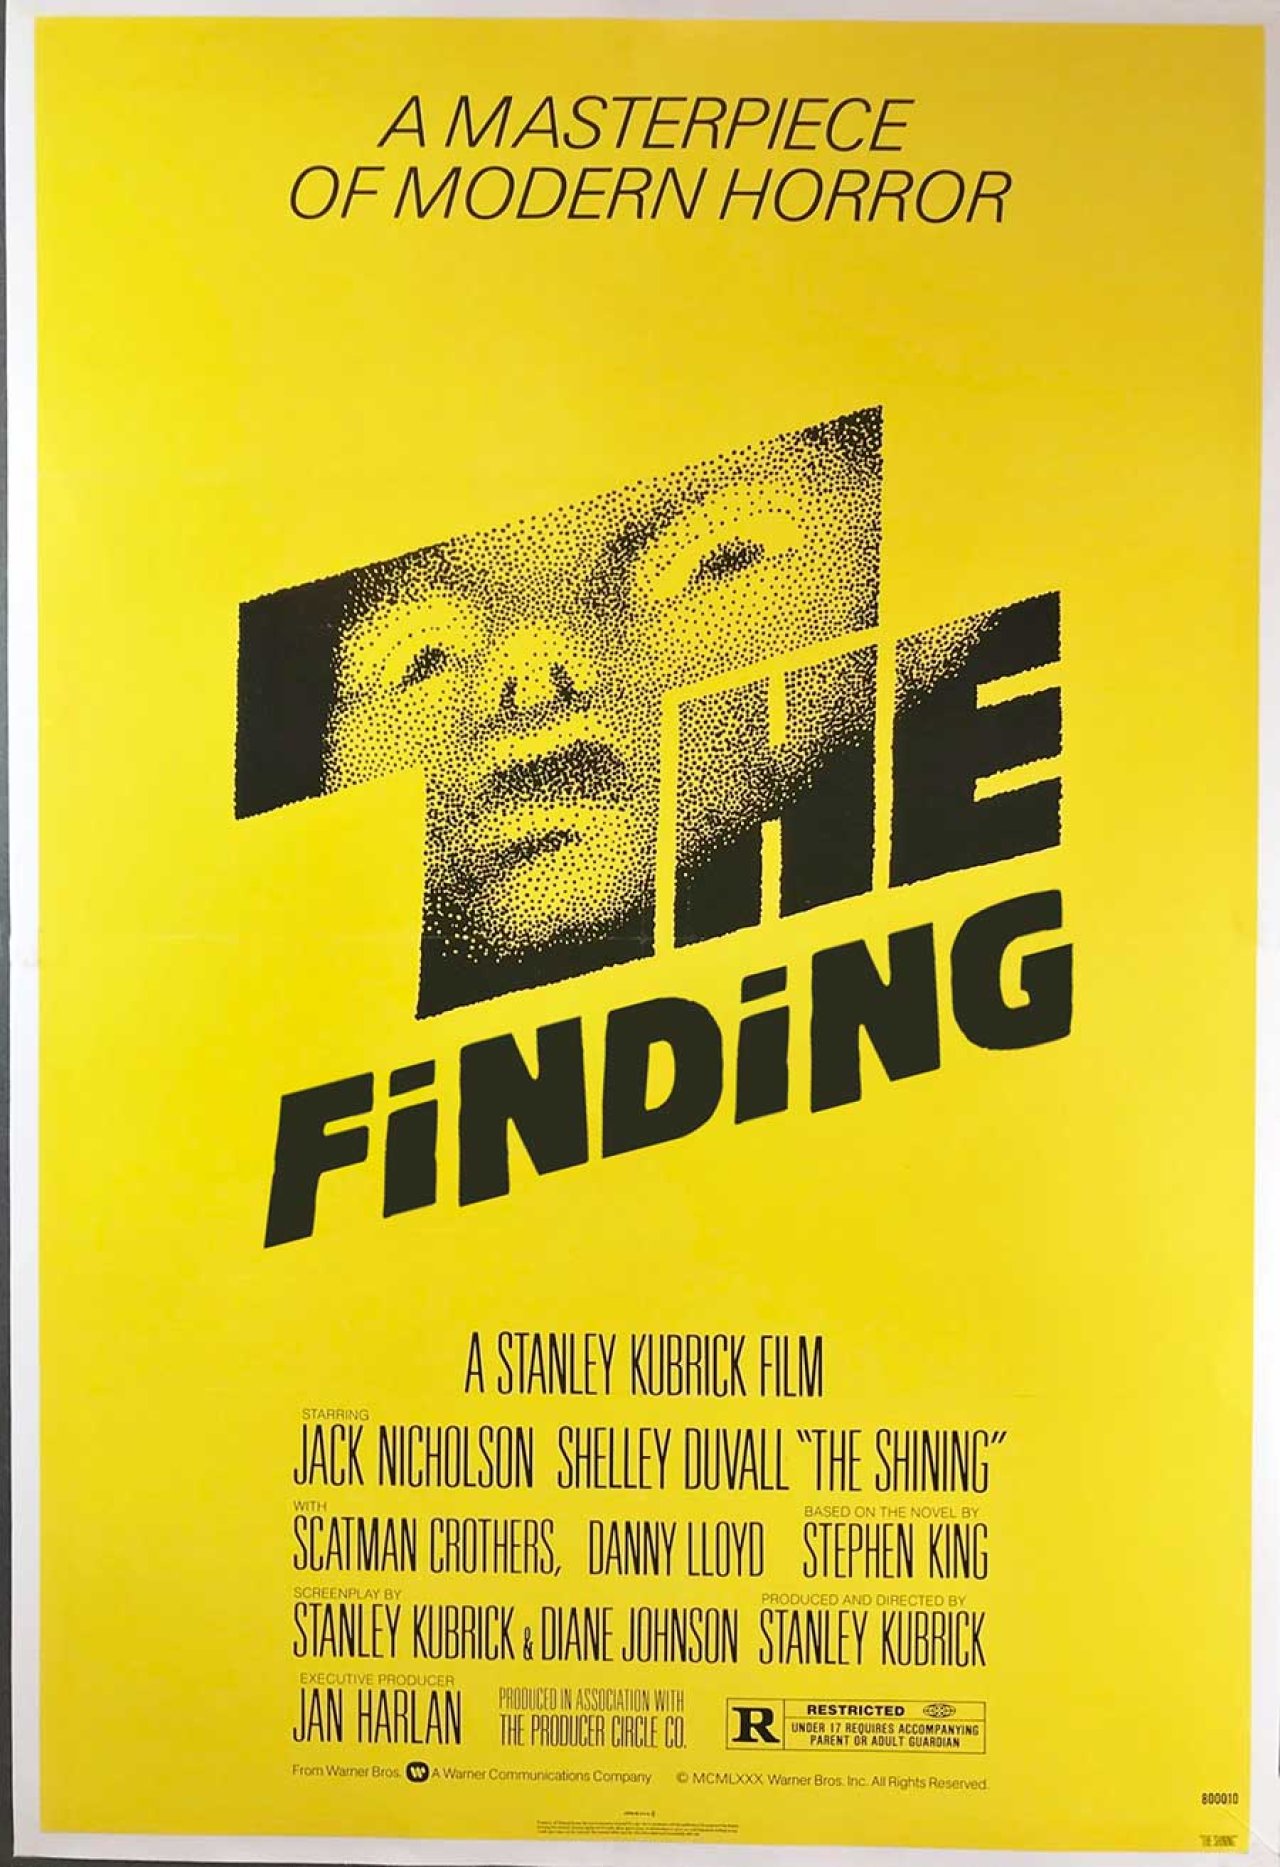 Movie poster parody - The Finding.